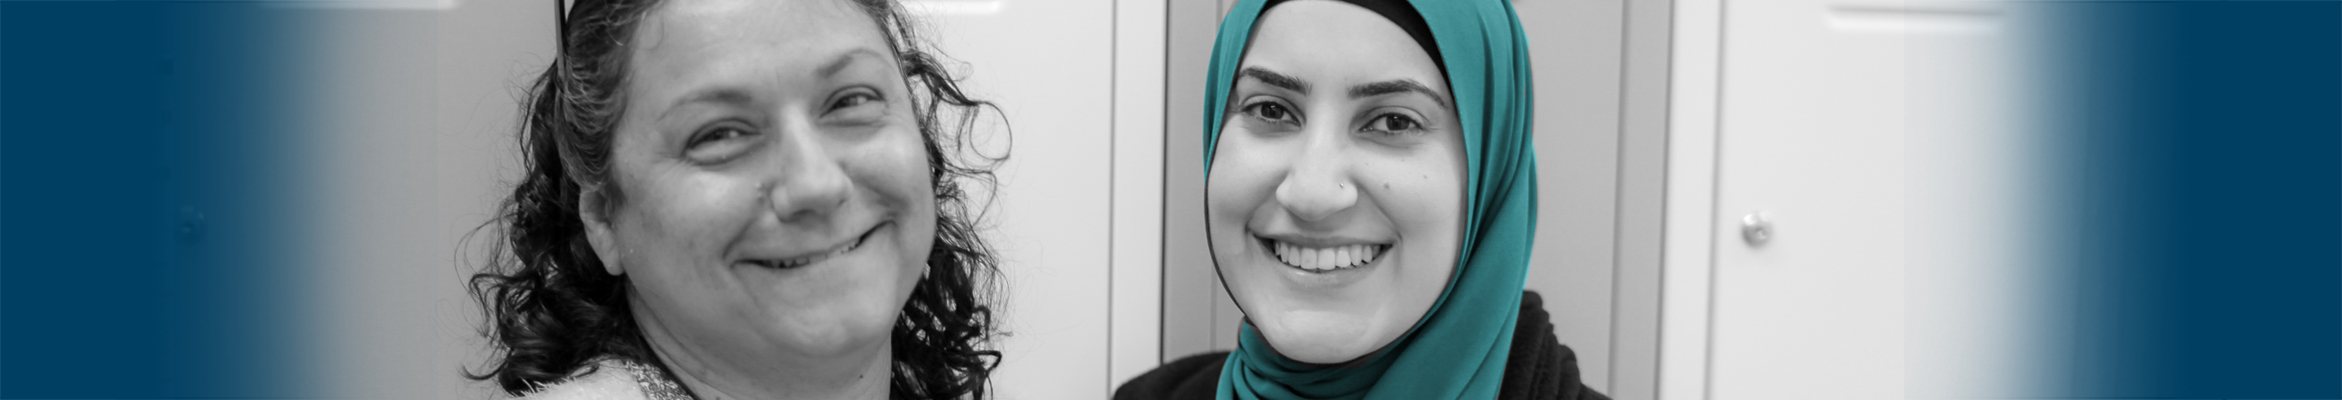 Two people look at the camera - the person on the left has dark curly hair and the person on the right is wearing a hijab.